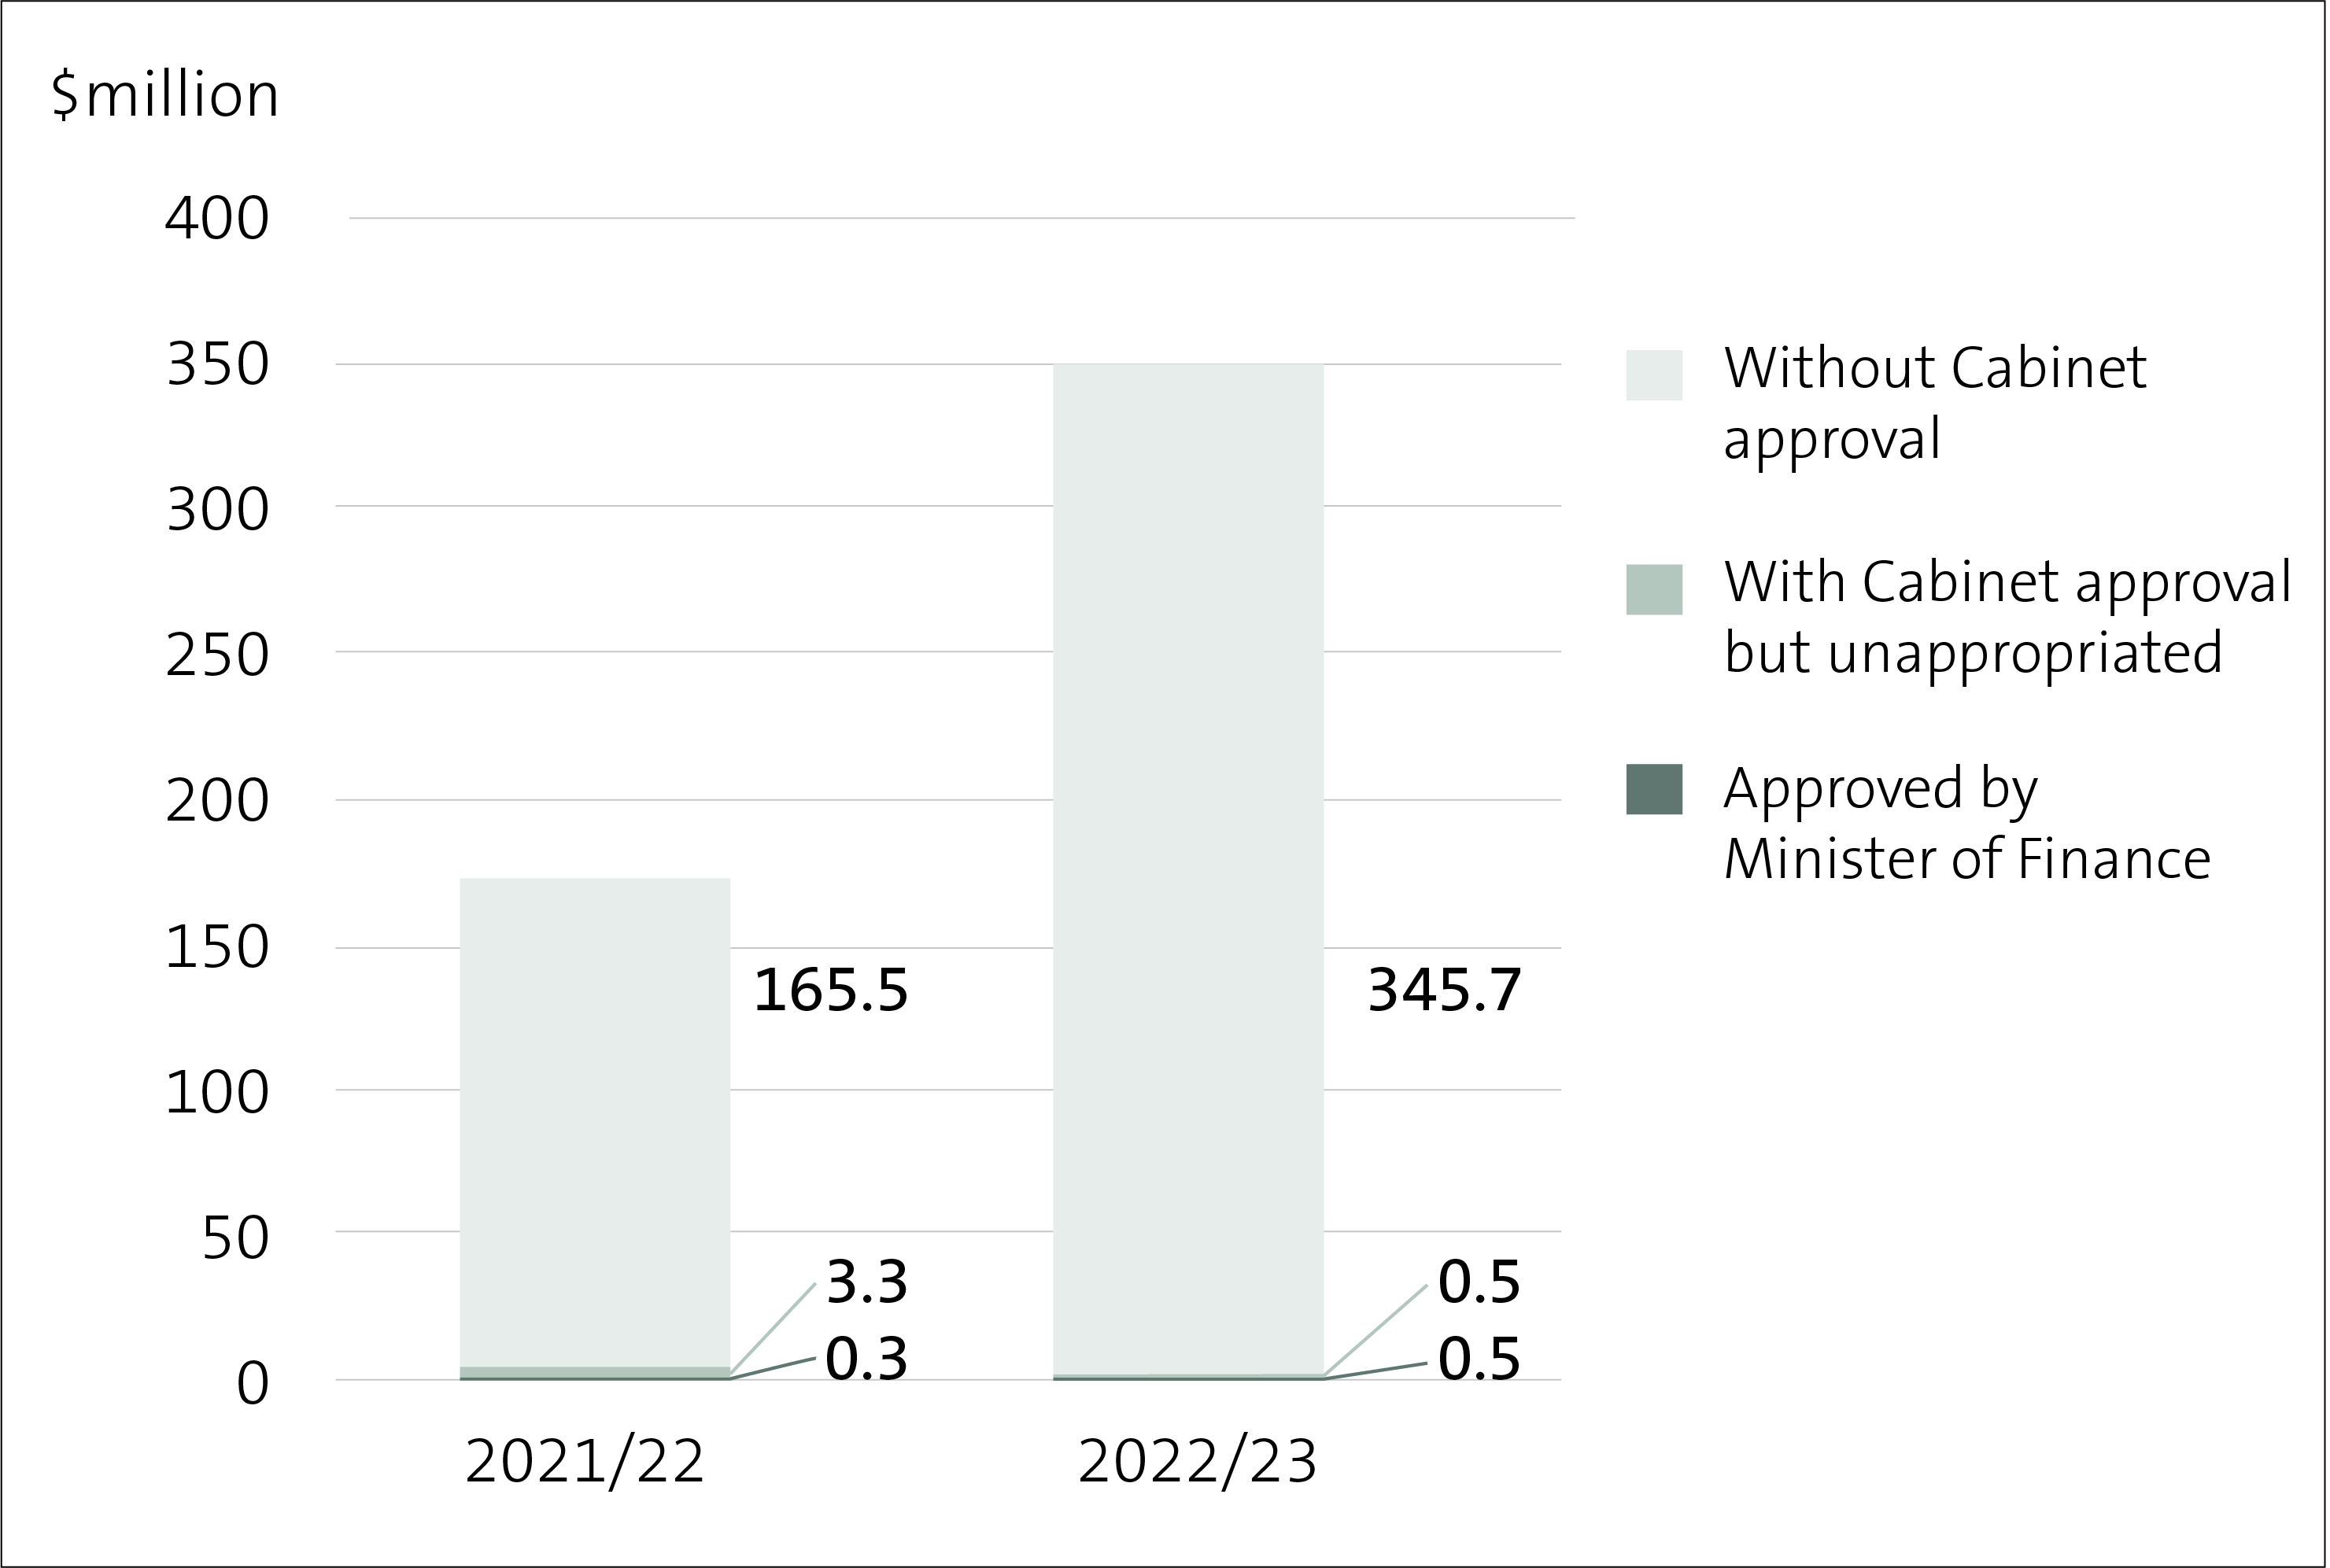 Figure 3 - Amount of unappropriated expenditure for 2021/22 and 2022/23